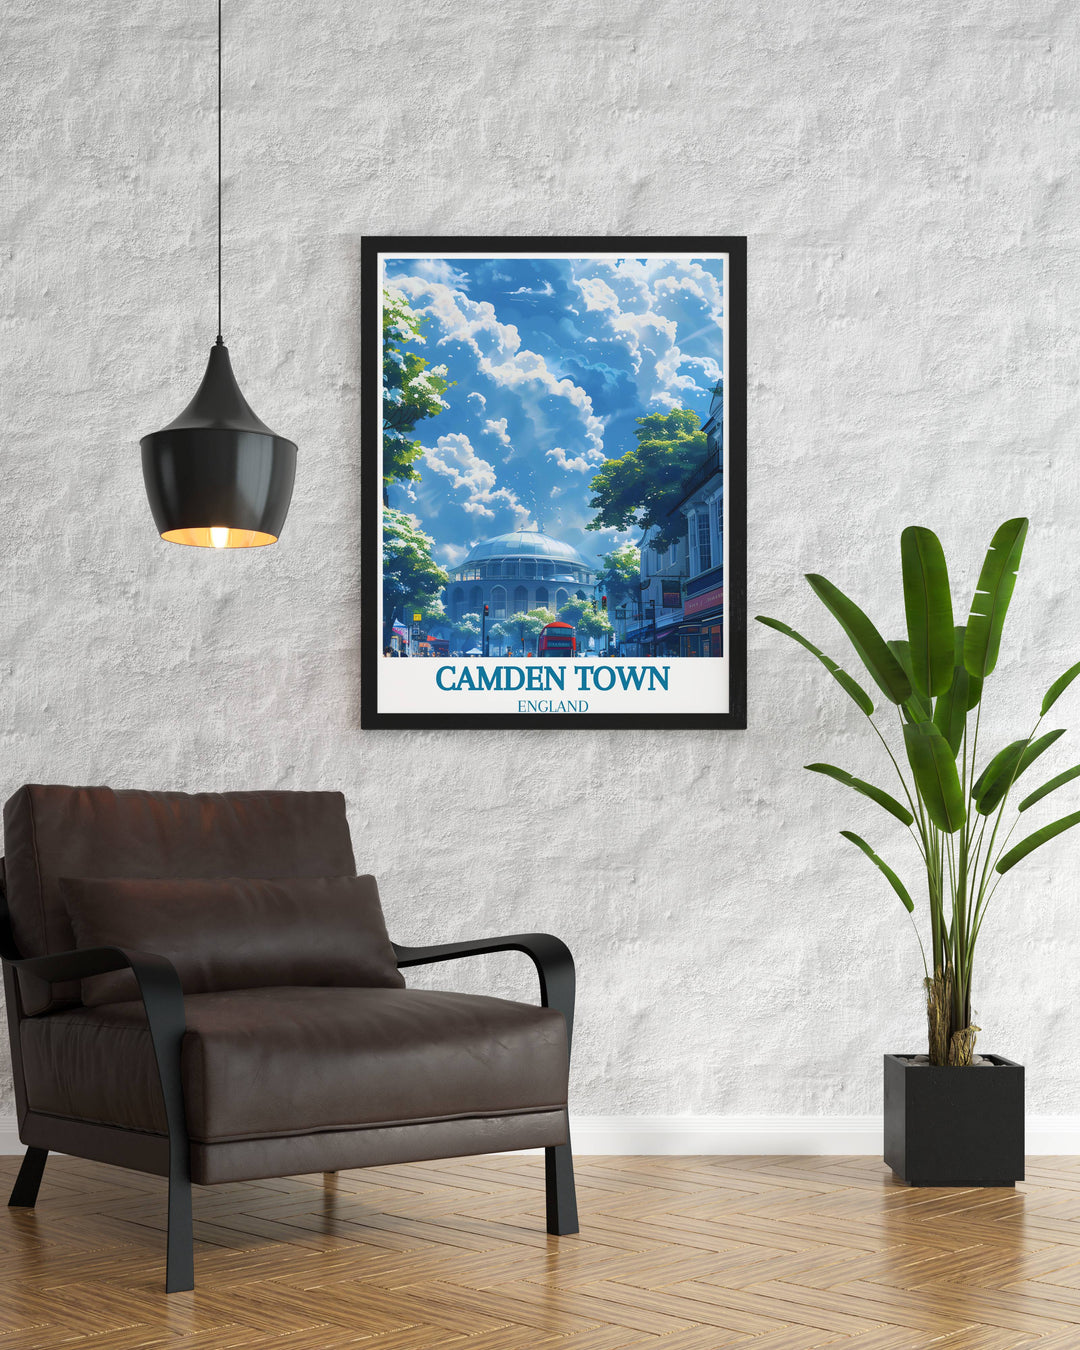 Camden Market Art print with The Roundhouse showcasing the dynamic street life and iconic landmarks of Camden Town London a beautiful addition to your home decor or as a special travel memento.